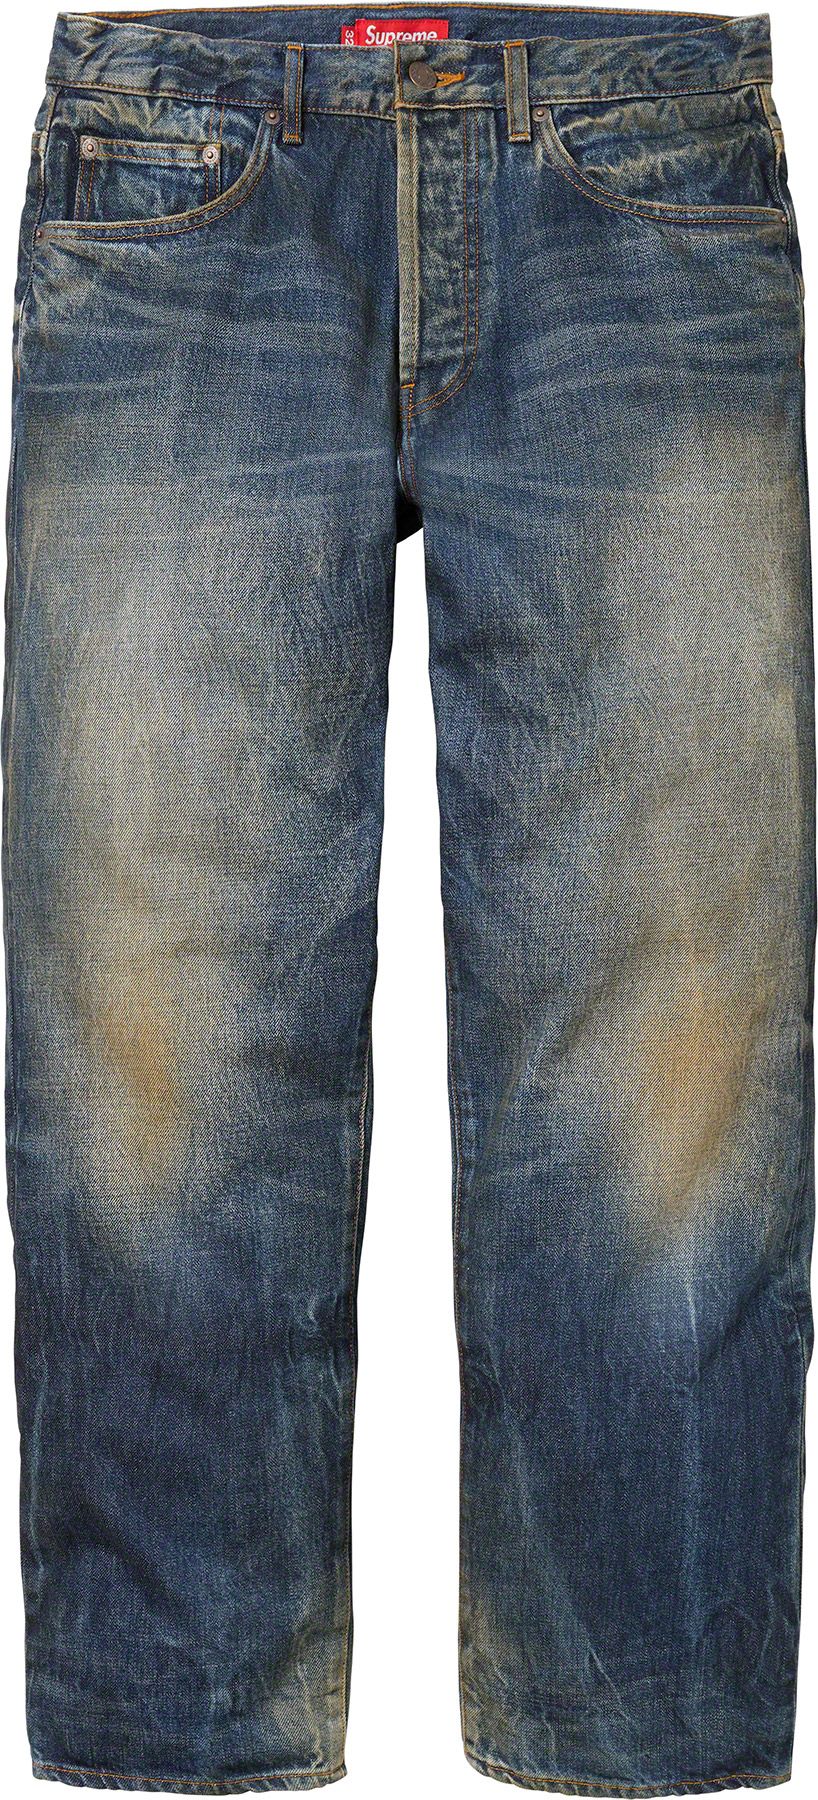 30 Supreme 23AW Distressed Loose Fit Selvedge Jean Washed Blue-